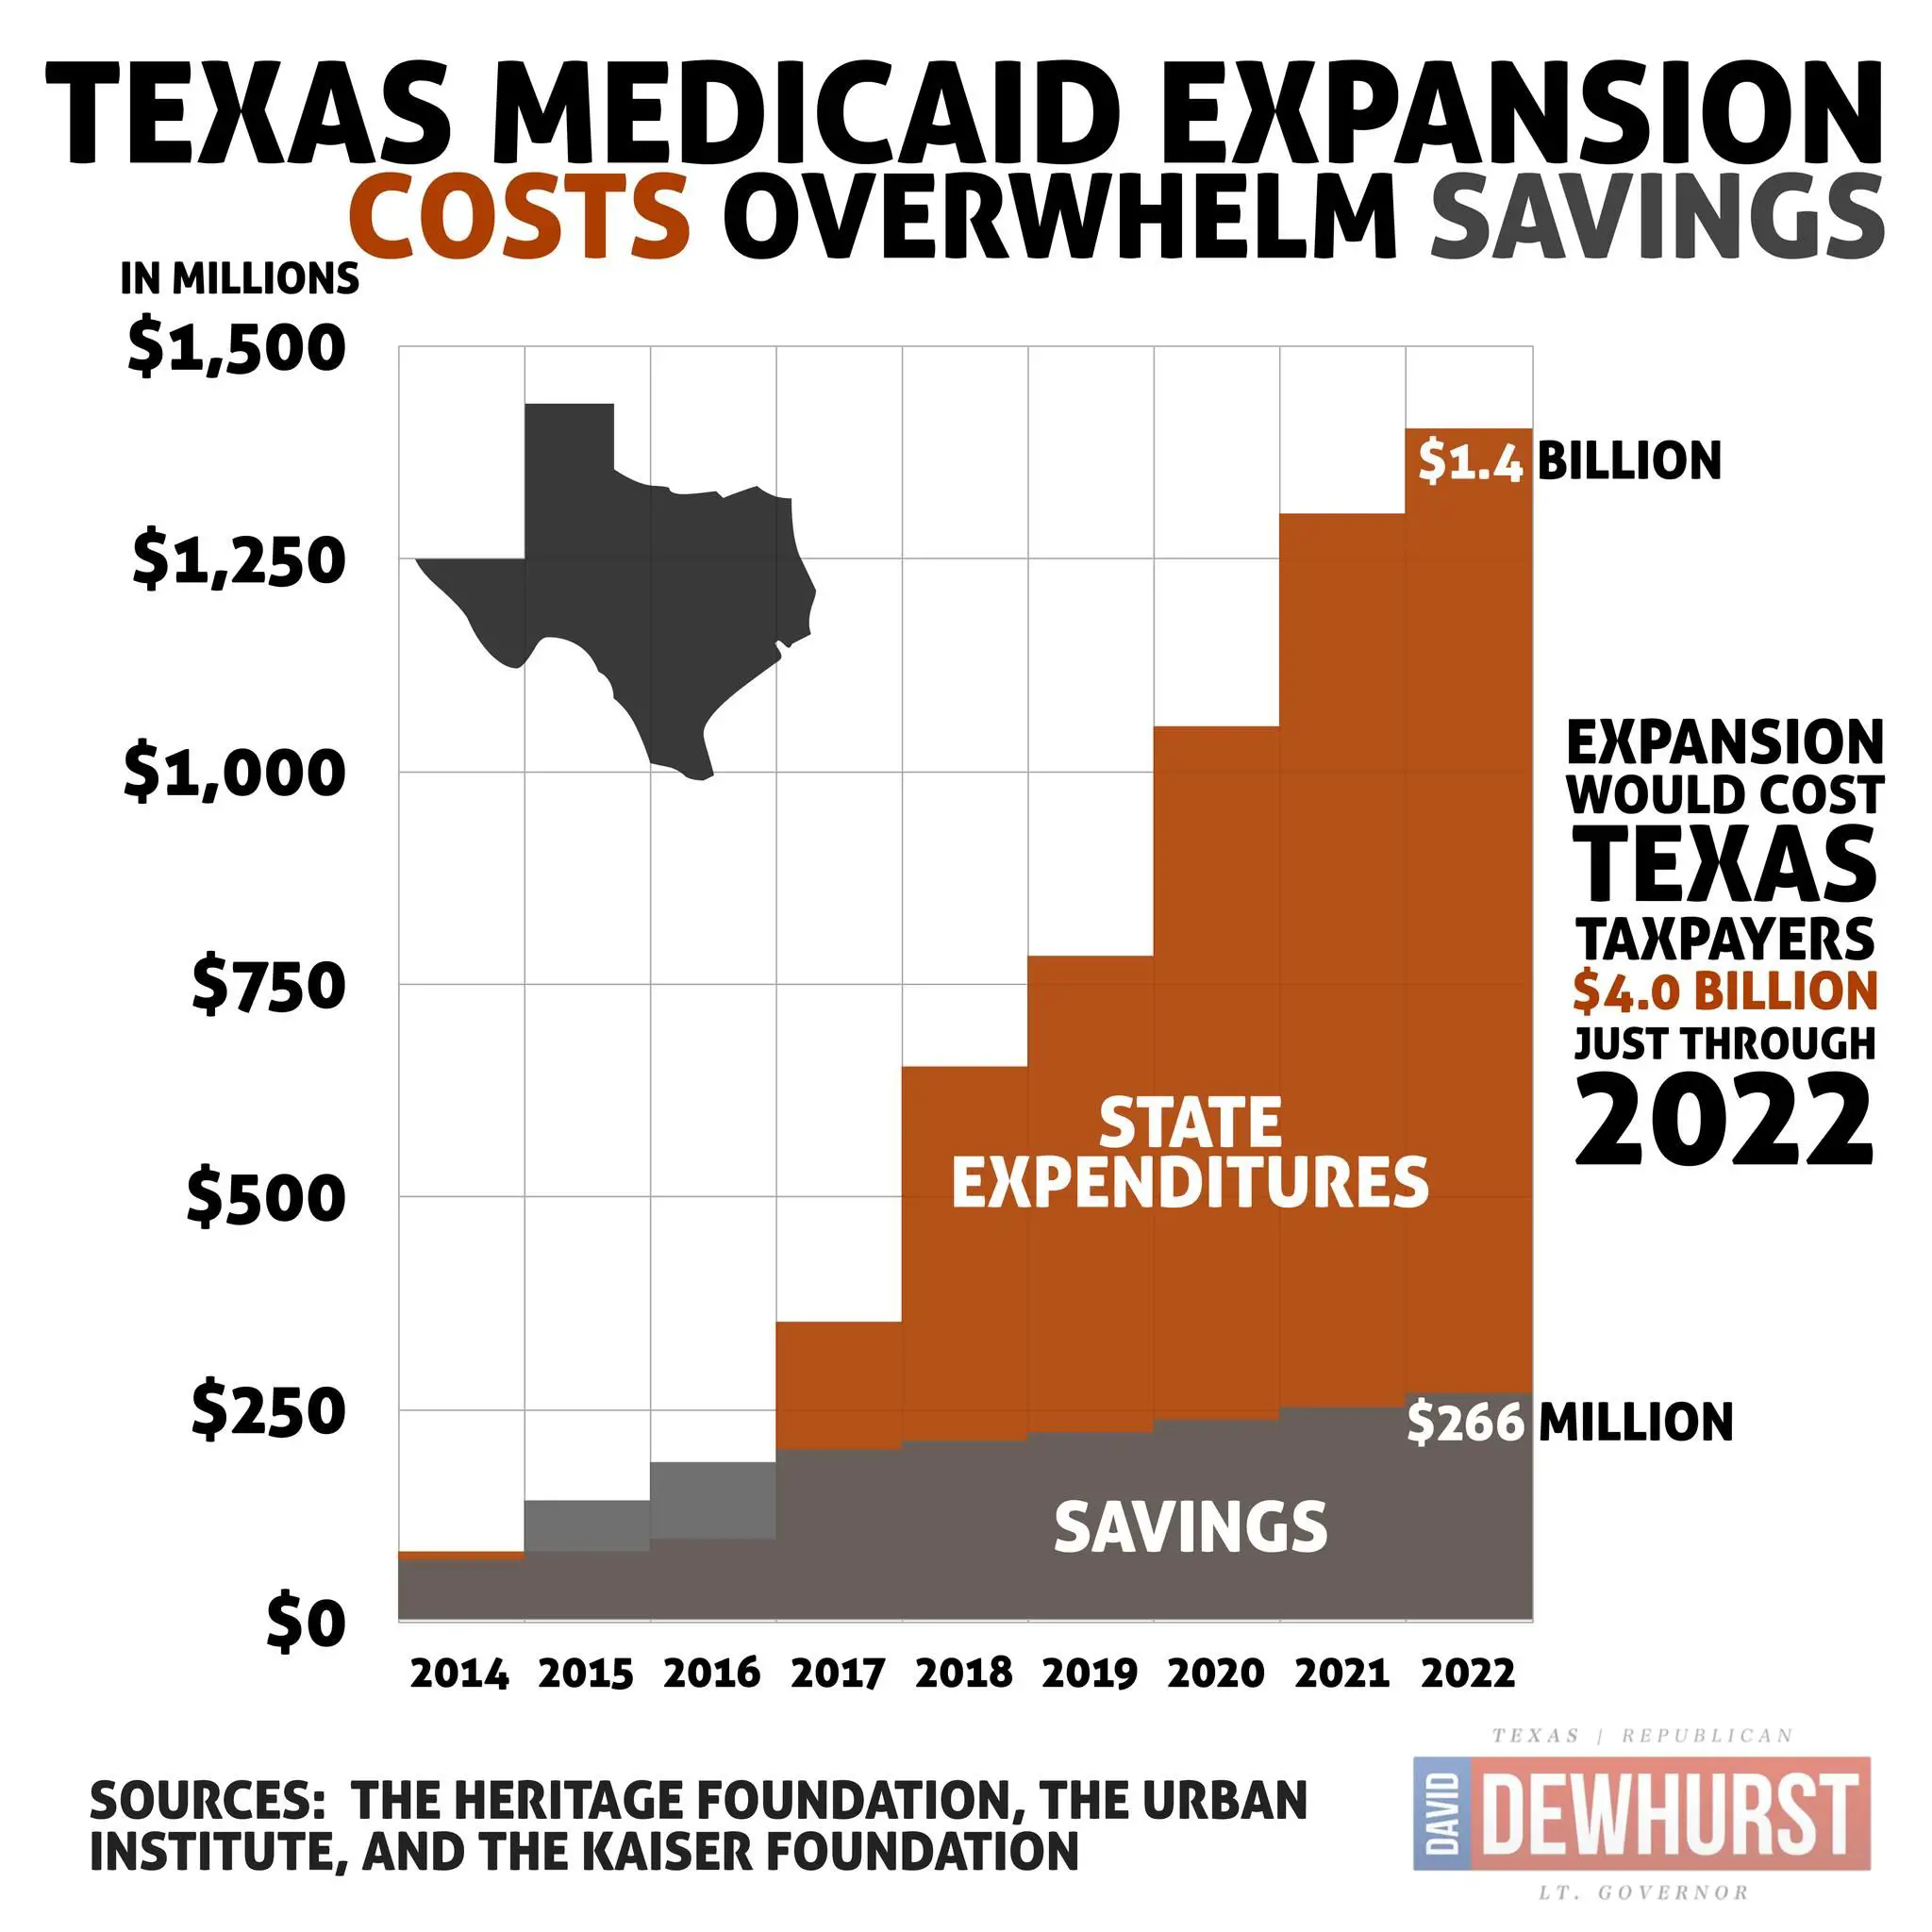 How To Apply For Medicaid In Texas